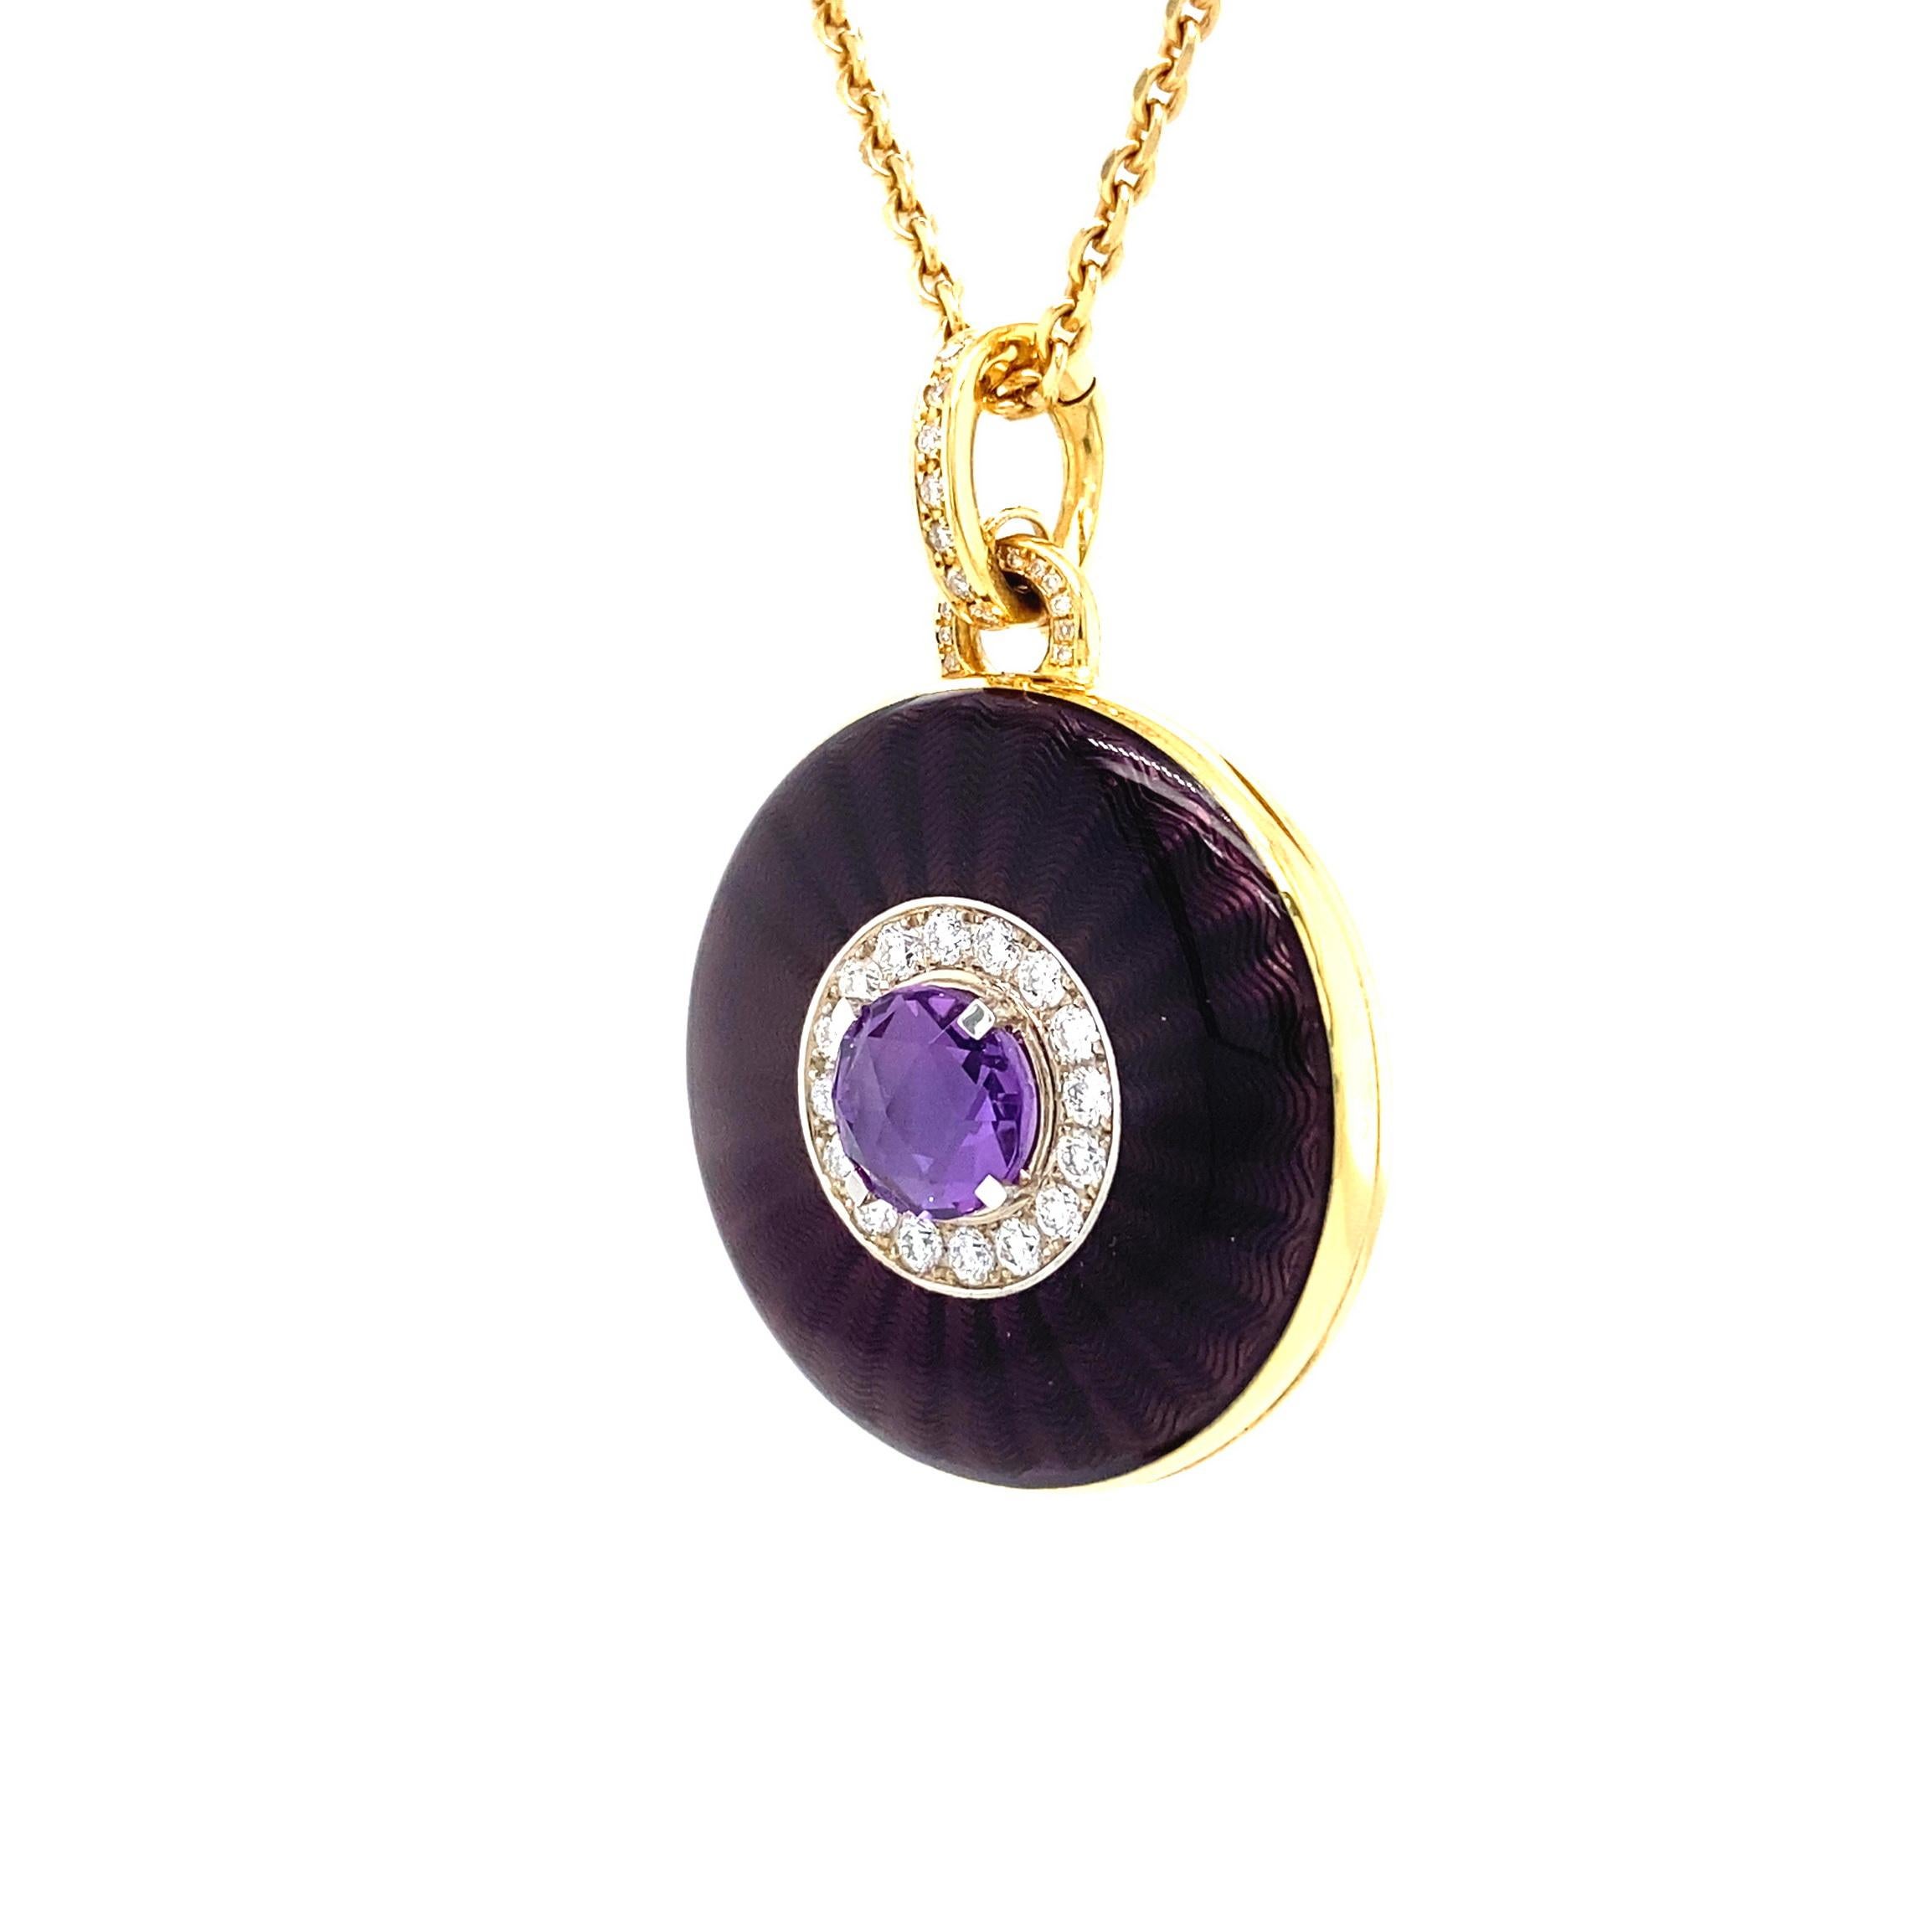 Victor Mayer customizable round locket pendant necklace 18k yellow gold and white gold, Opera Collection, translucent purple vitreous enamel, guilloche, 37 diamonds, total 0.37 ct, G VS, brilliant cut, 1 amethyst, diameter app Ø 26.0 mm

About the